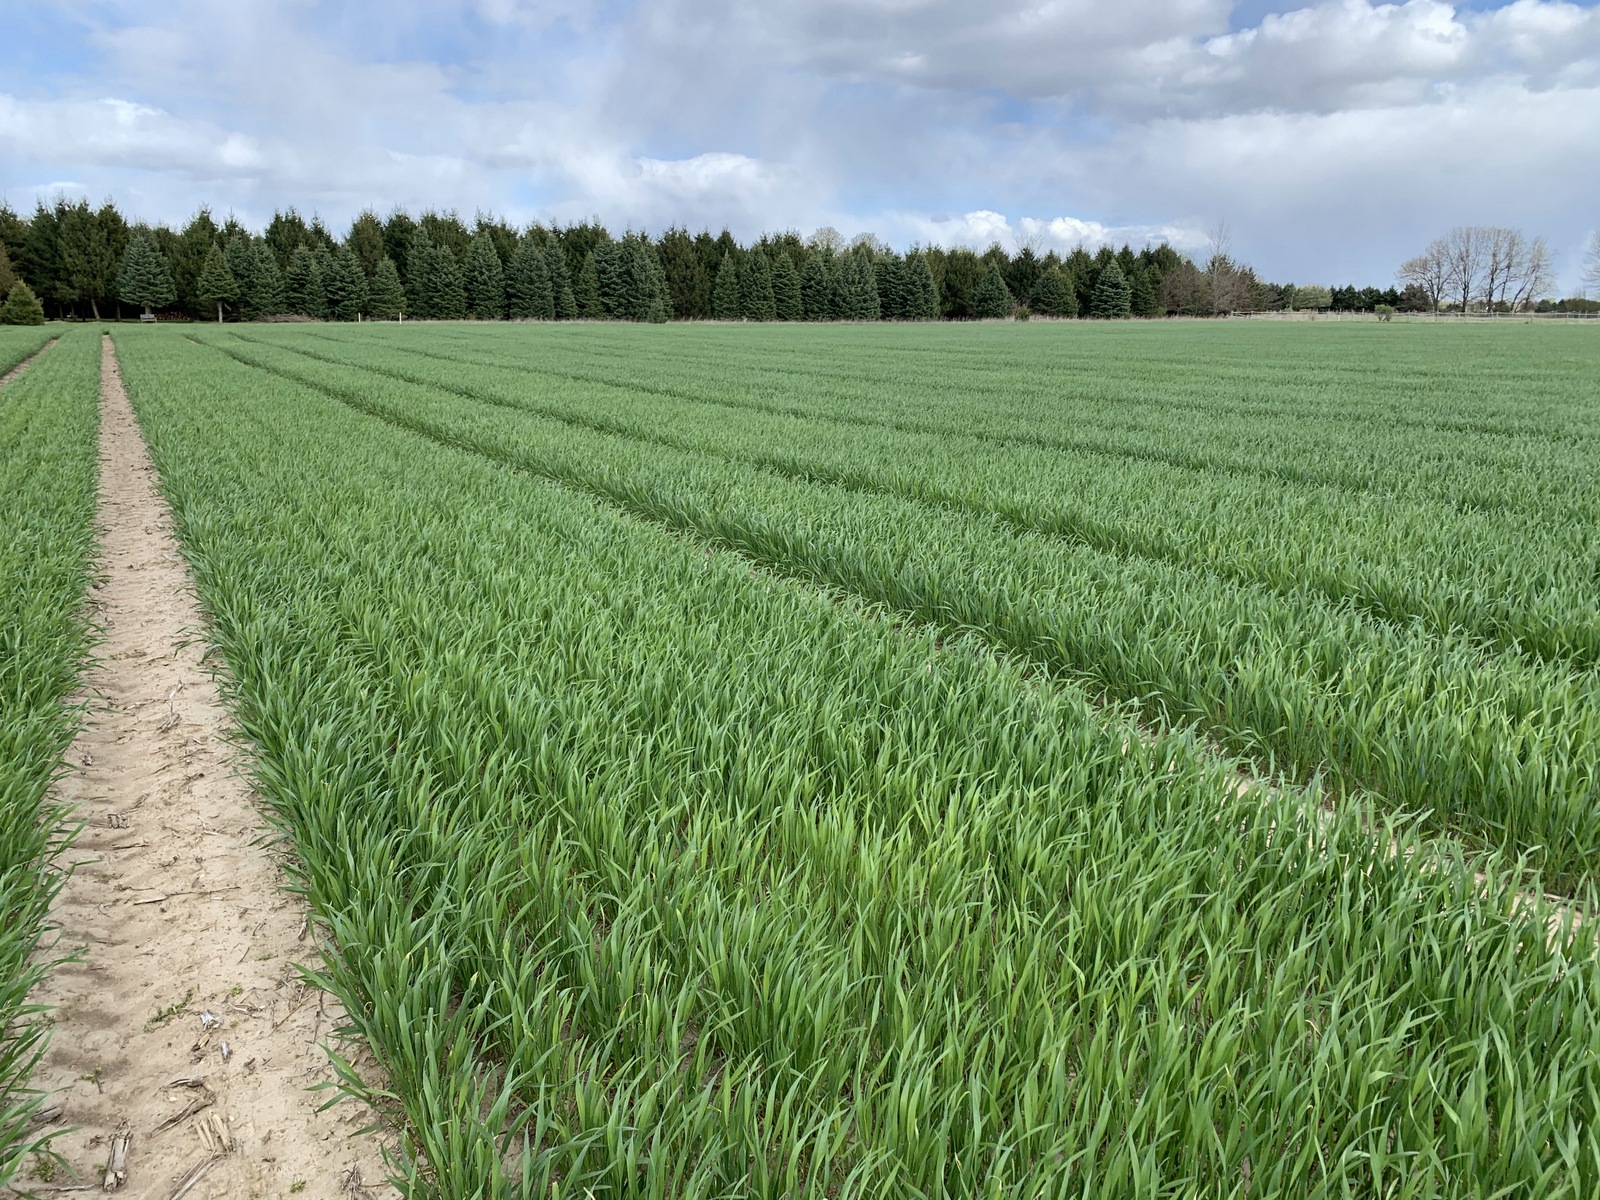 Winter wheat plots with tram-lines for applications without driving on the crop.